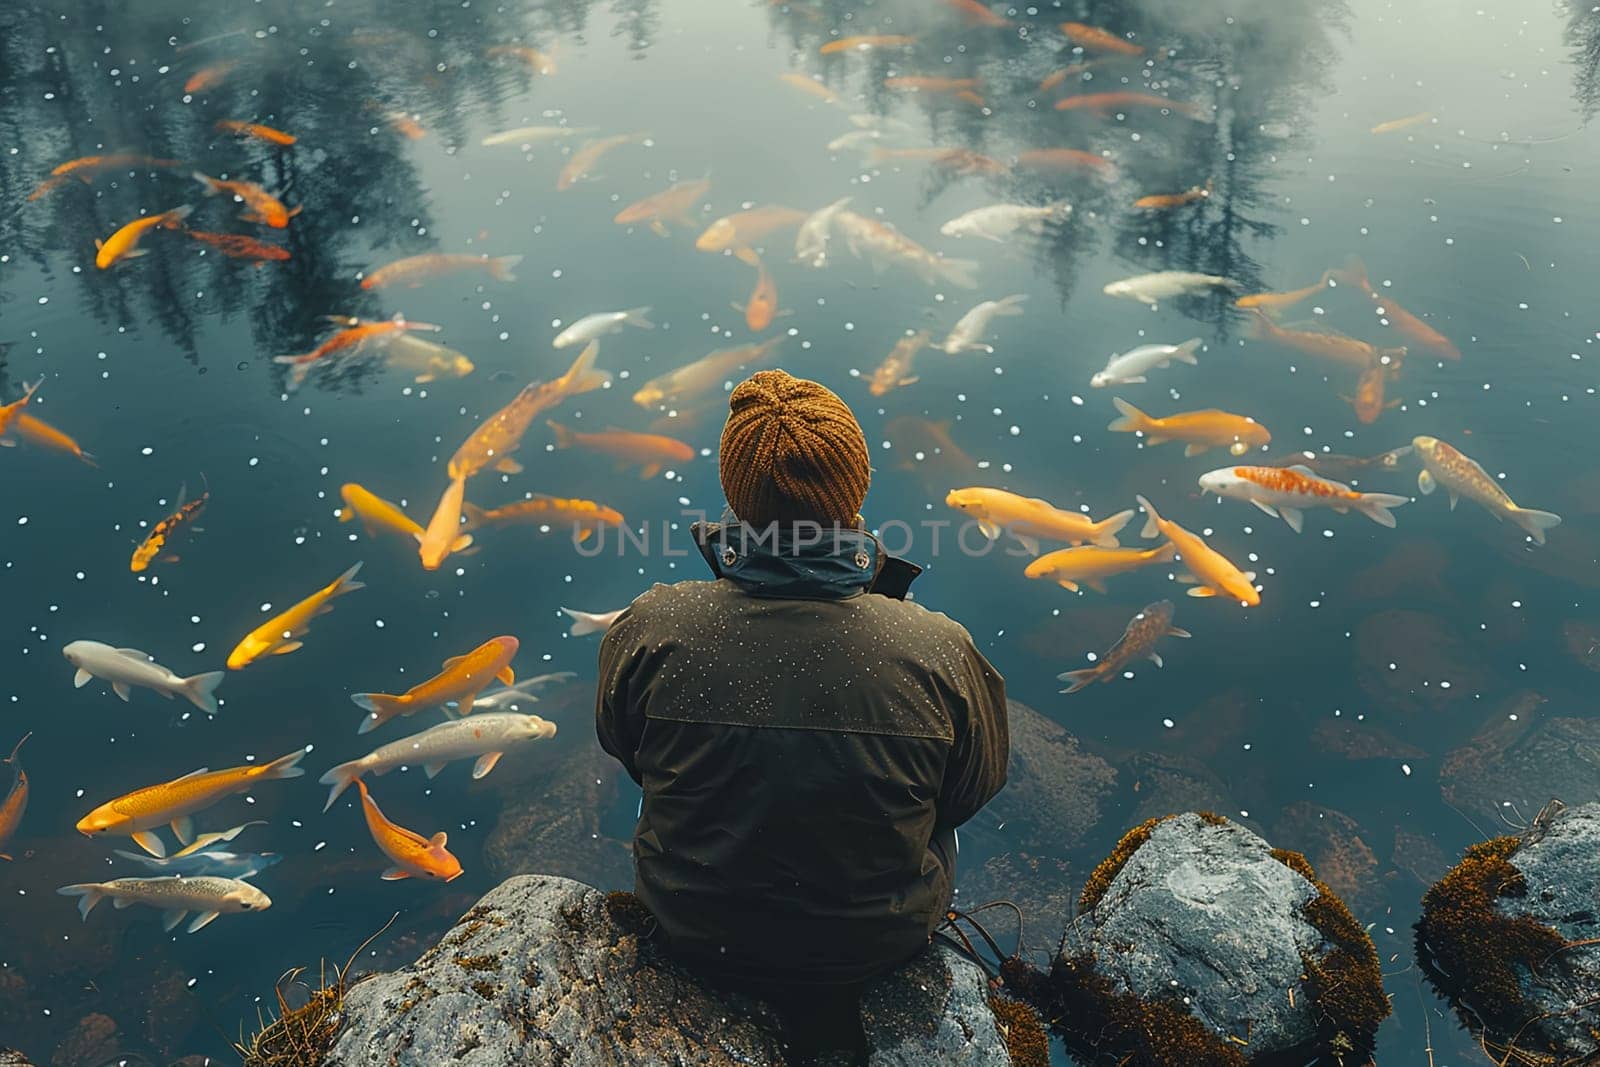 Solitary man seated by river, engrossed in fishing among vibrant koi fish, captures essence of peaceful solitude.